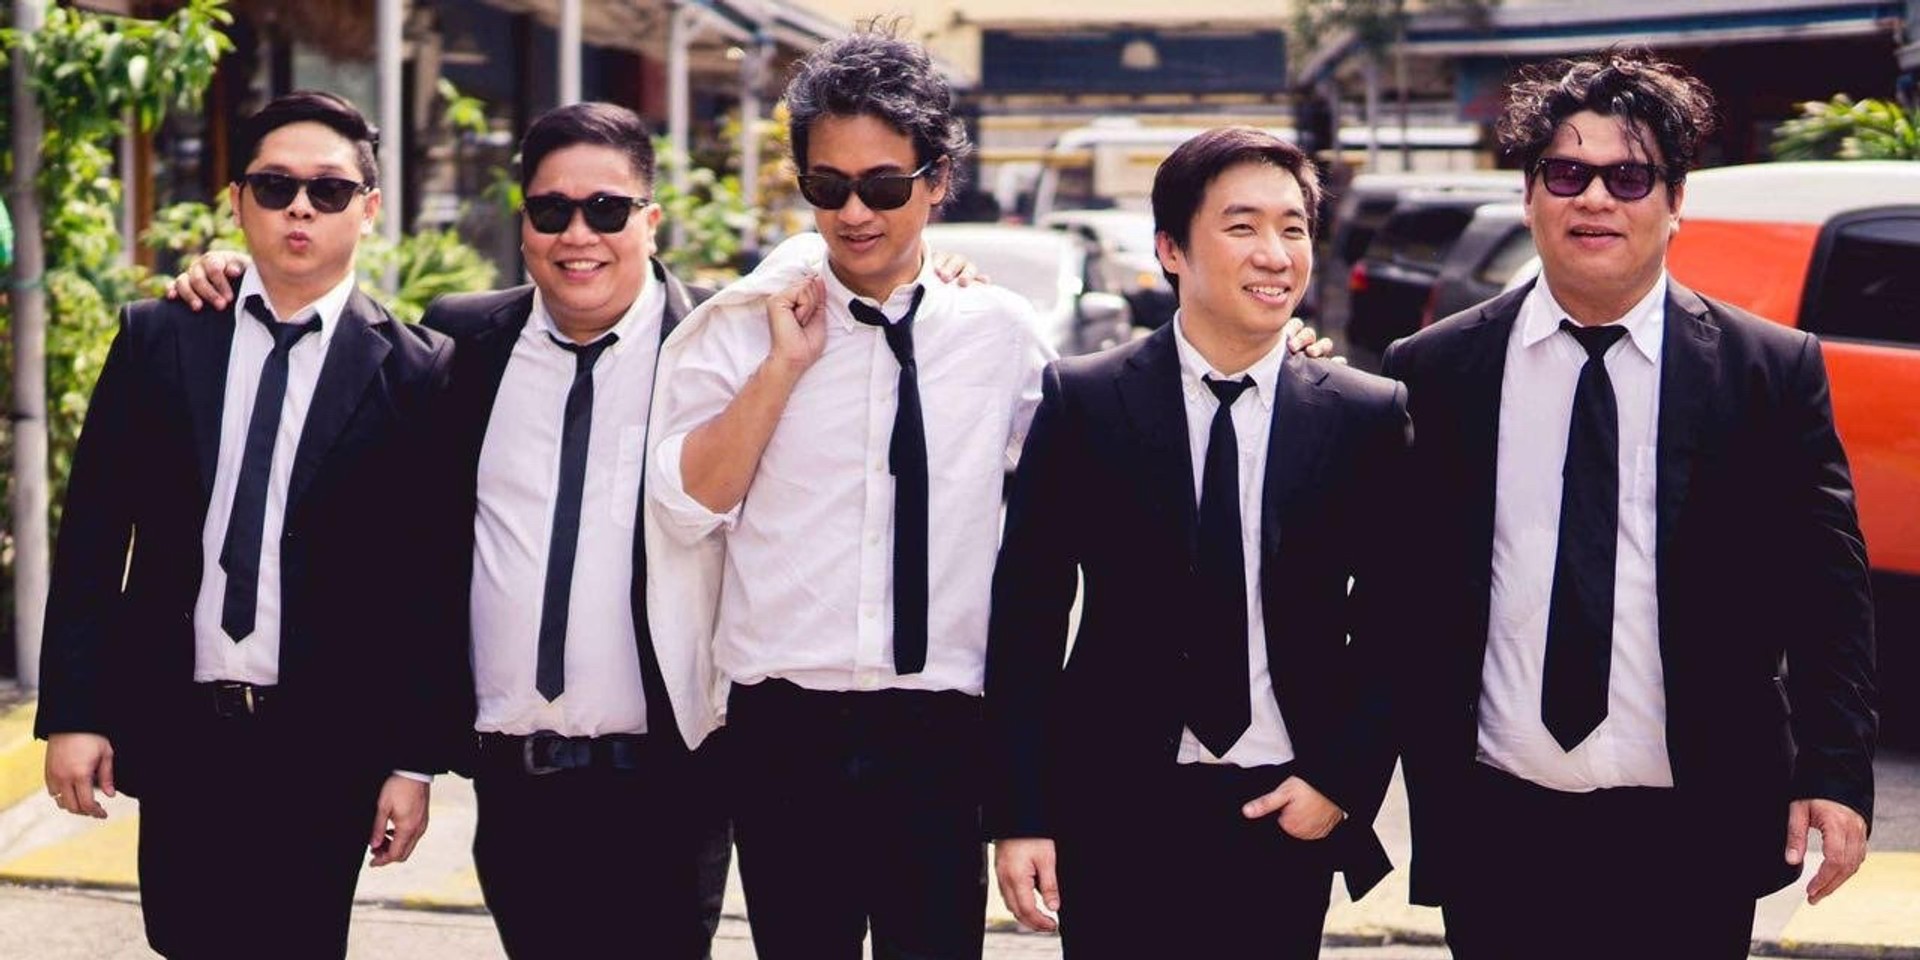 Record Store Day Pilipinas 2018 line-up includes Ely Buendia & The Itchyworms, The Ransom Collective, and more